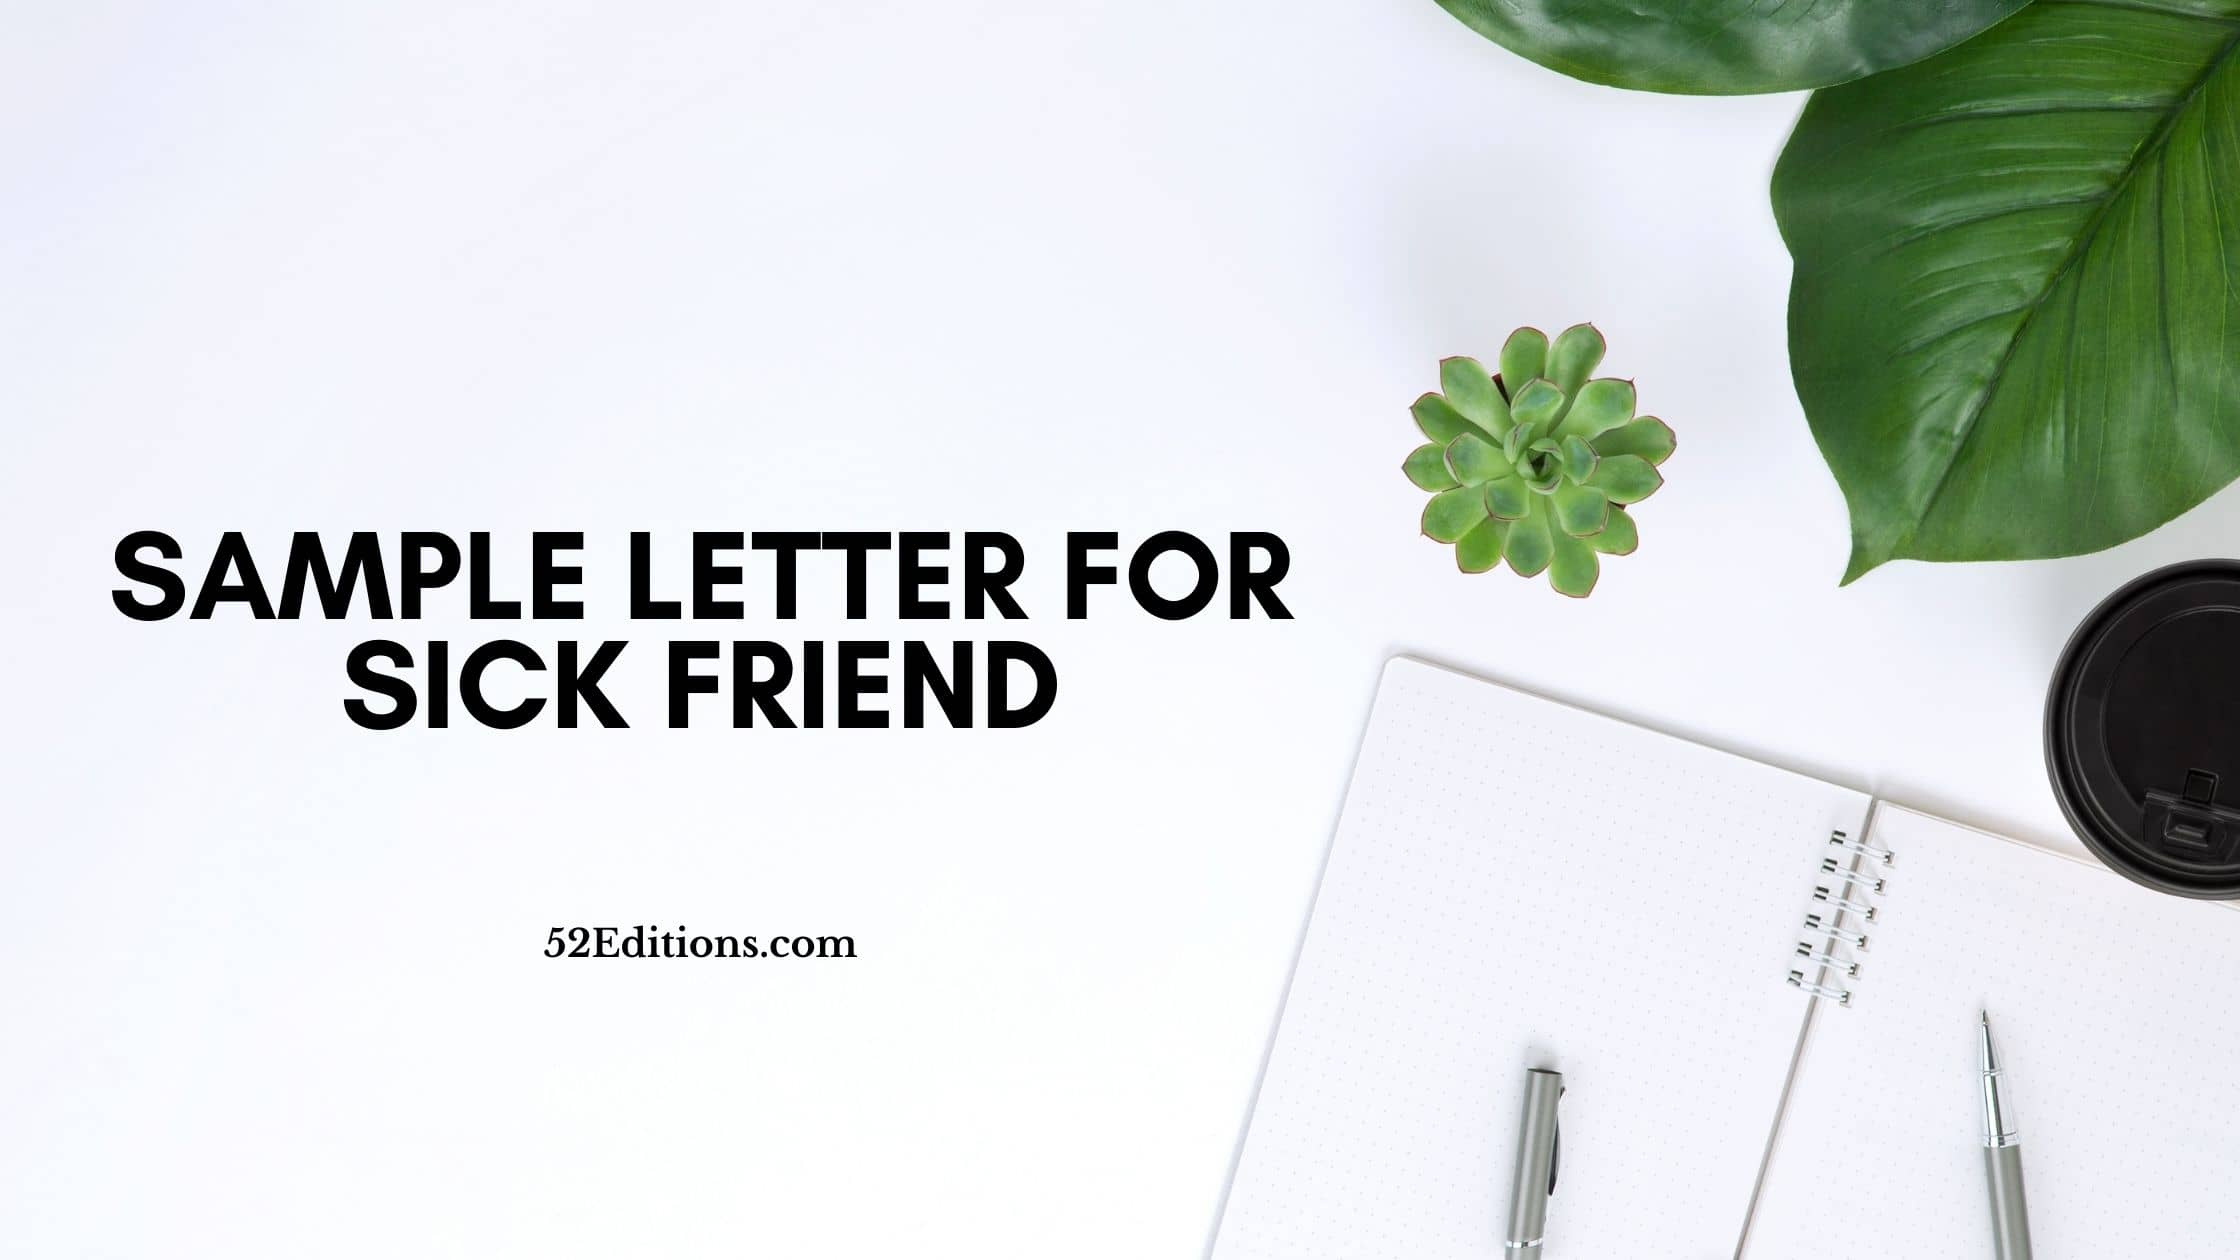 Sample Letter For Sick Friend FREE Letter Templates